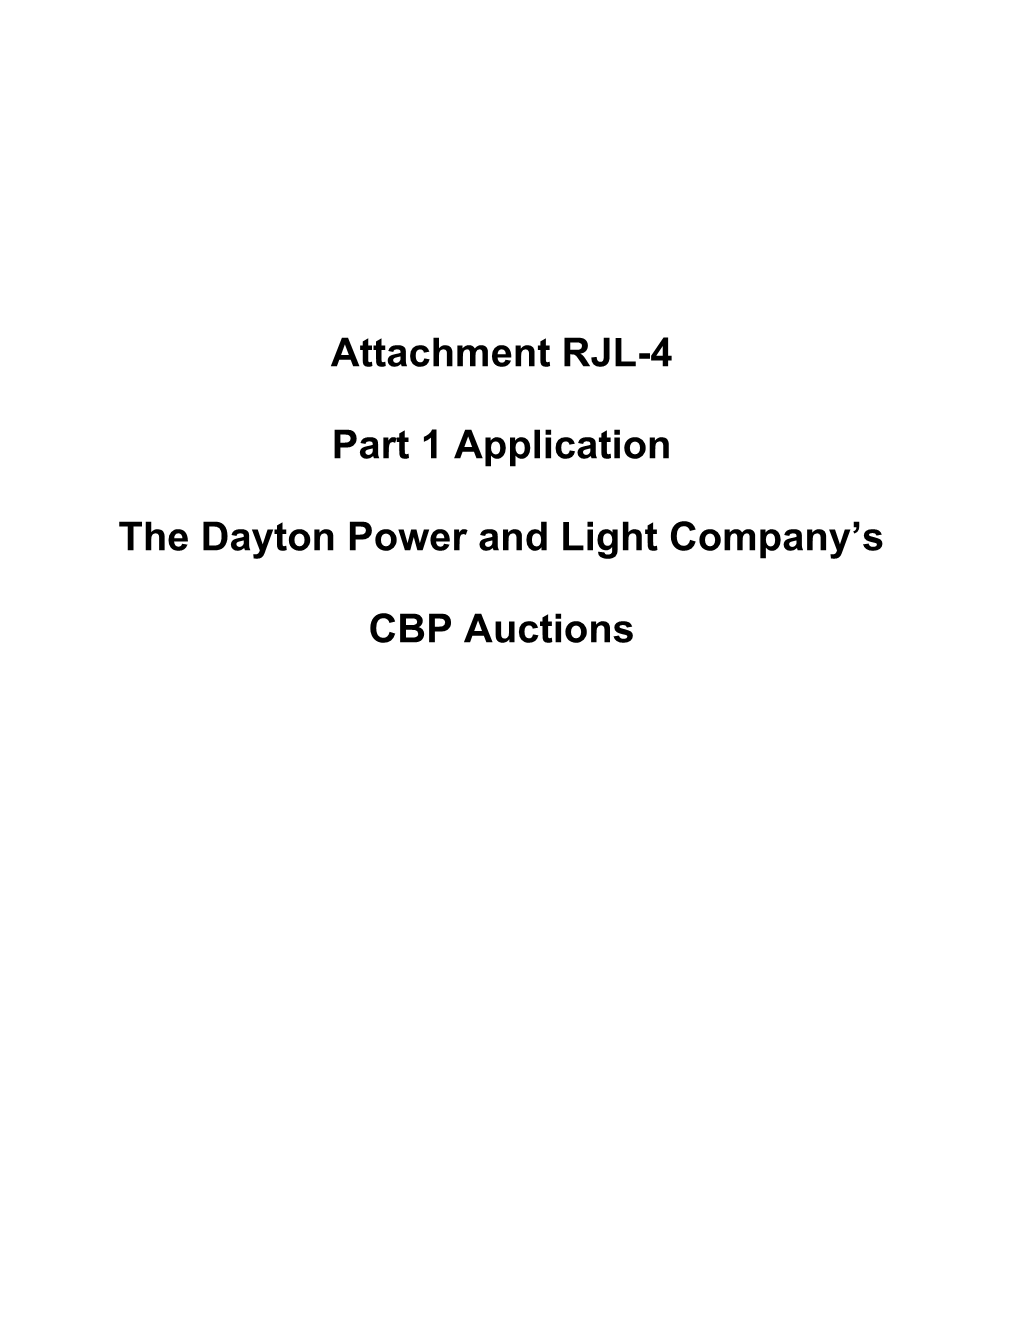 Part 1 Application: the Dayton Power and Light Company CBP Auctions